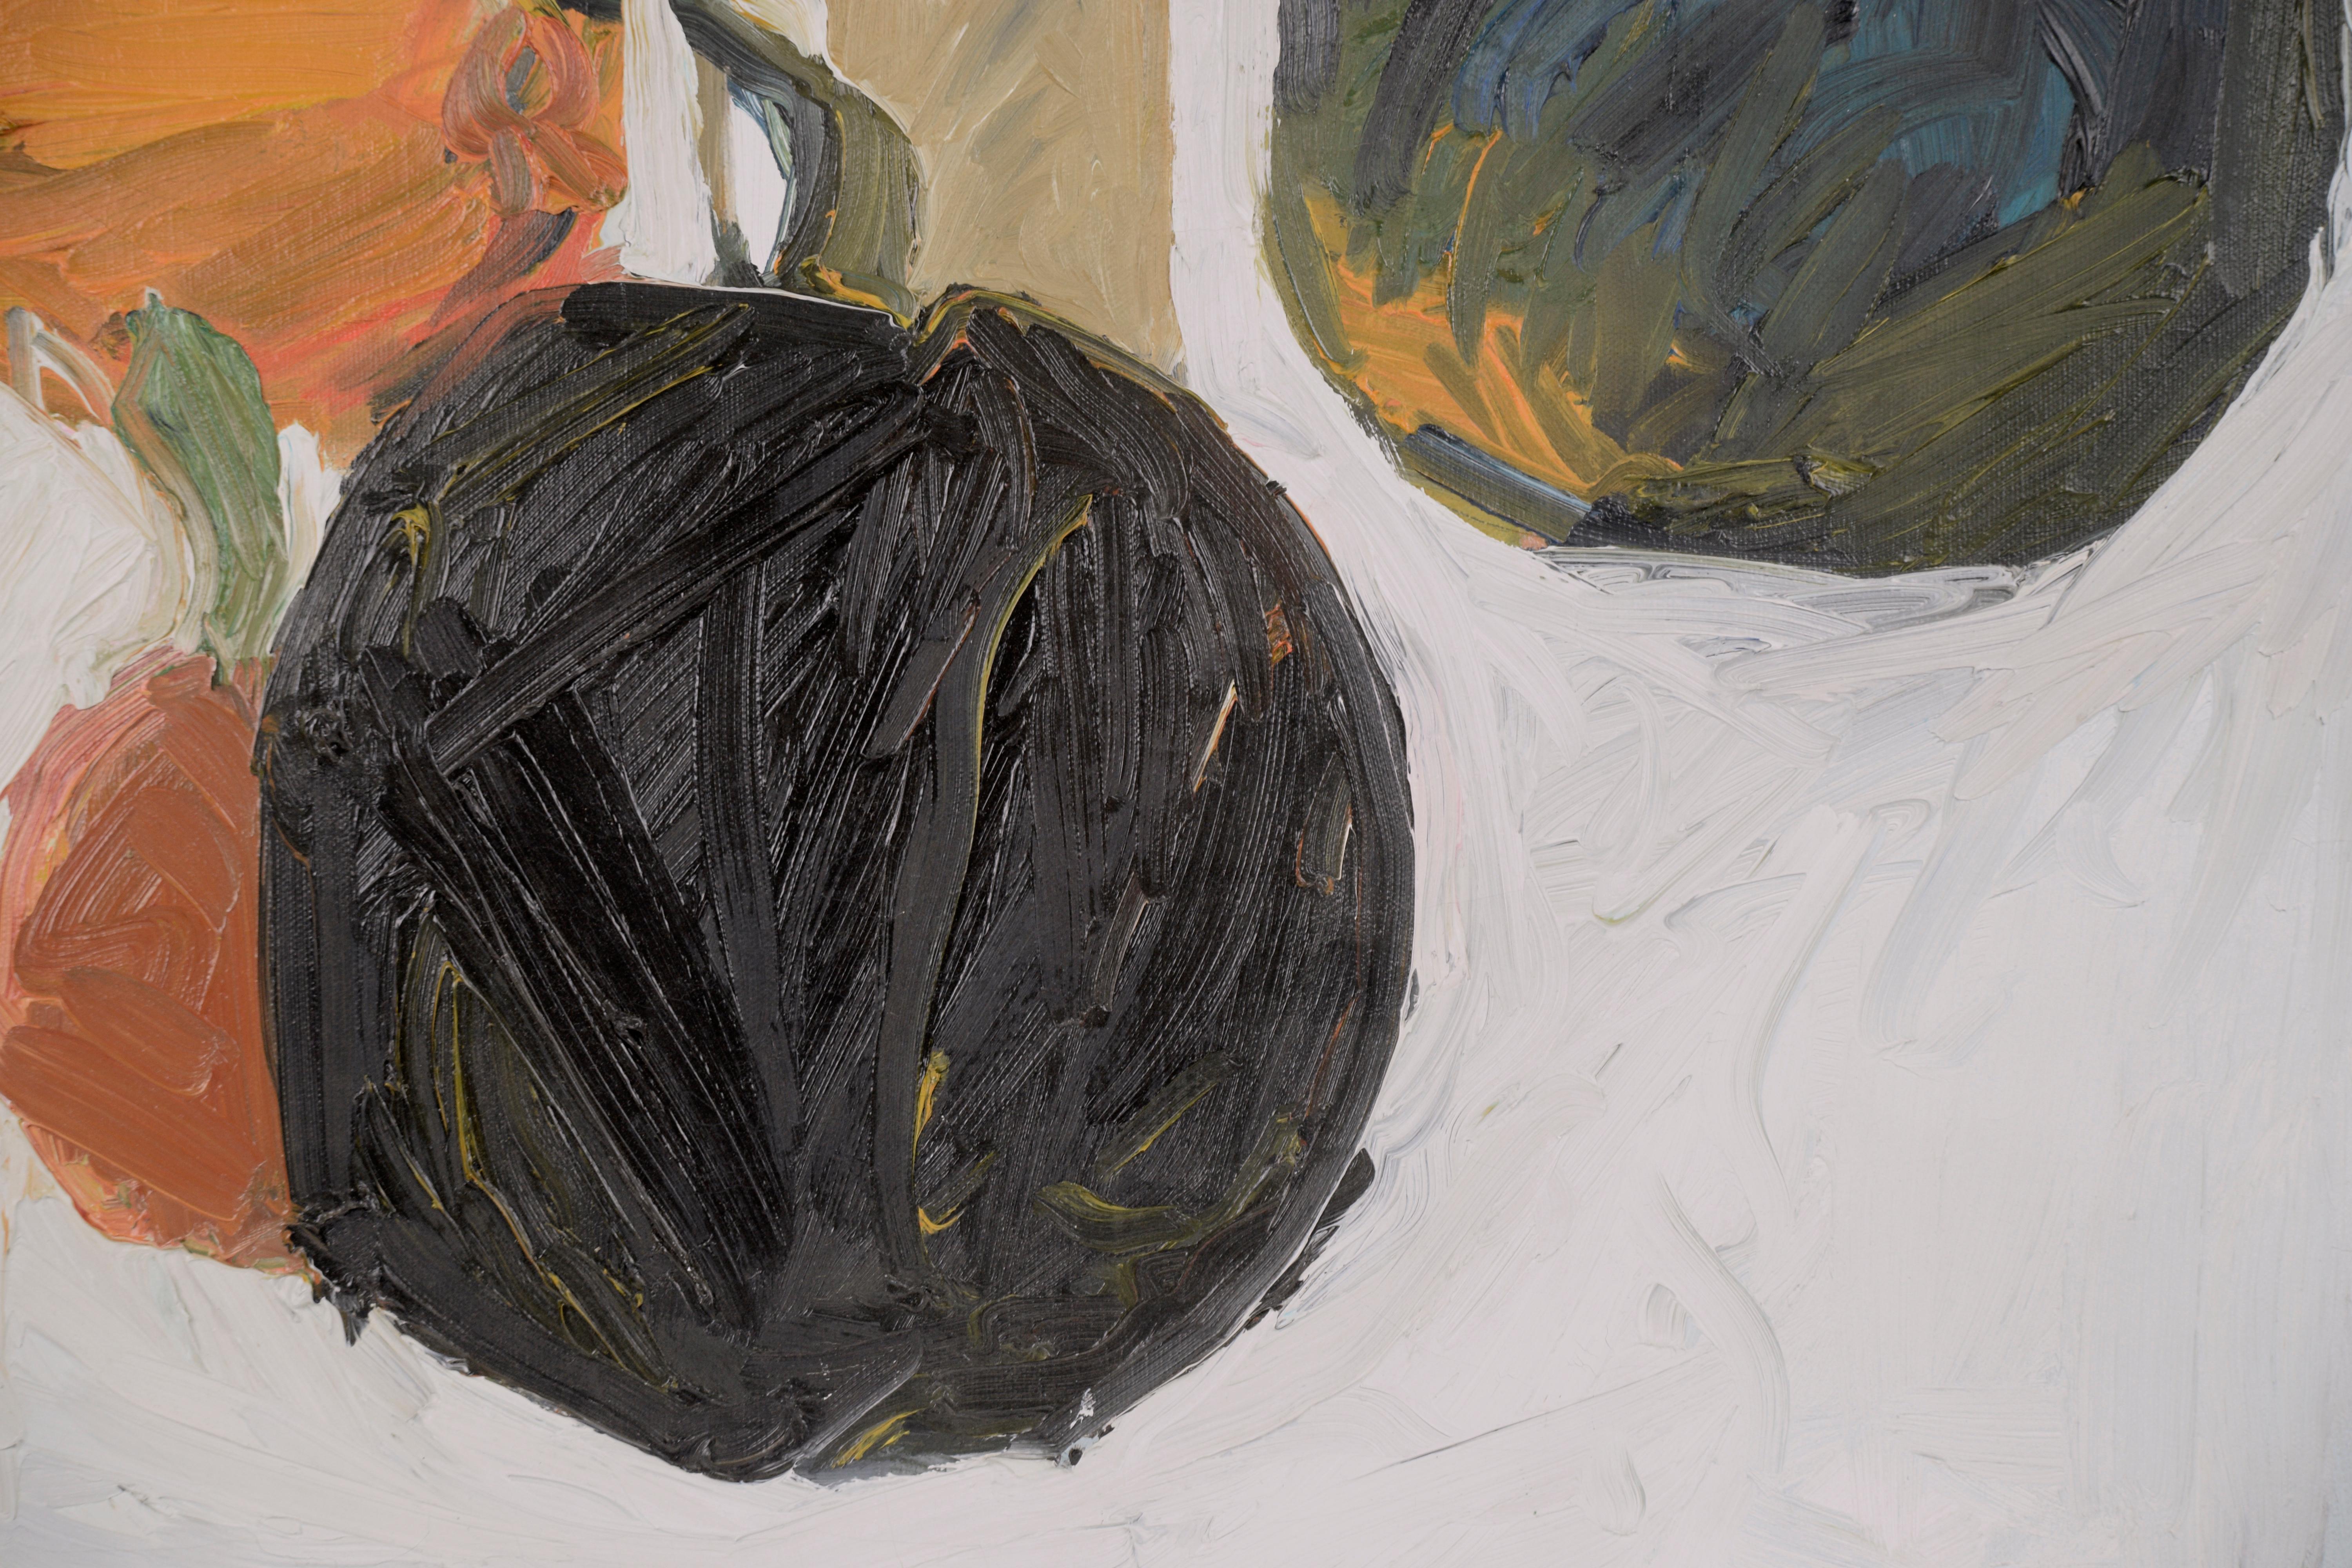 Modern expressionist autumn still-life of winter squash harvest by Bay Area artist Michael Pauker (American, b. 1957), c.1970s. Despite the more traditional subject matter, the artist's dynamic, expressive brushstrokes combined with a minimalist